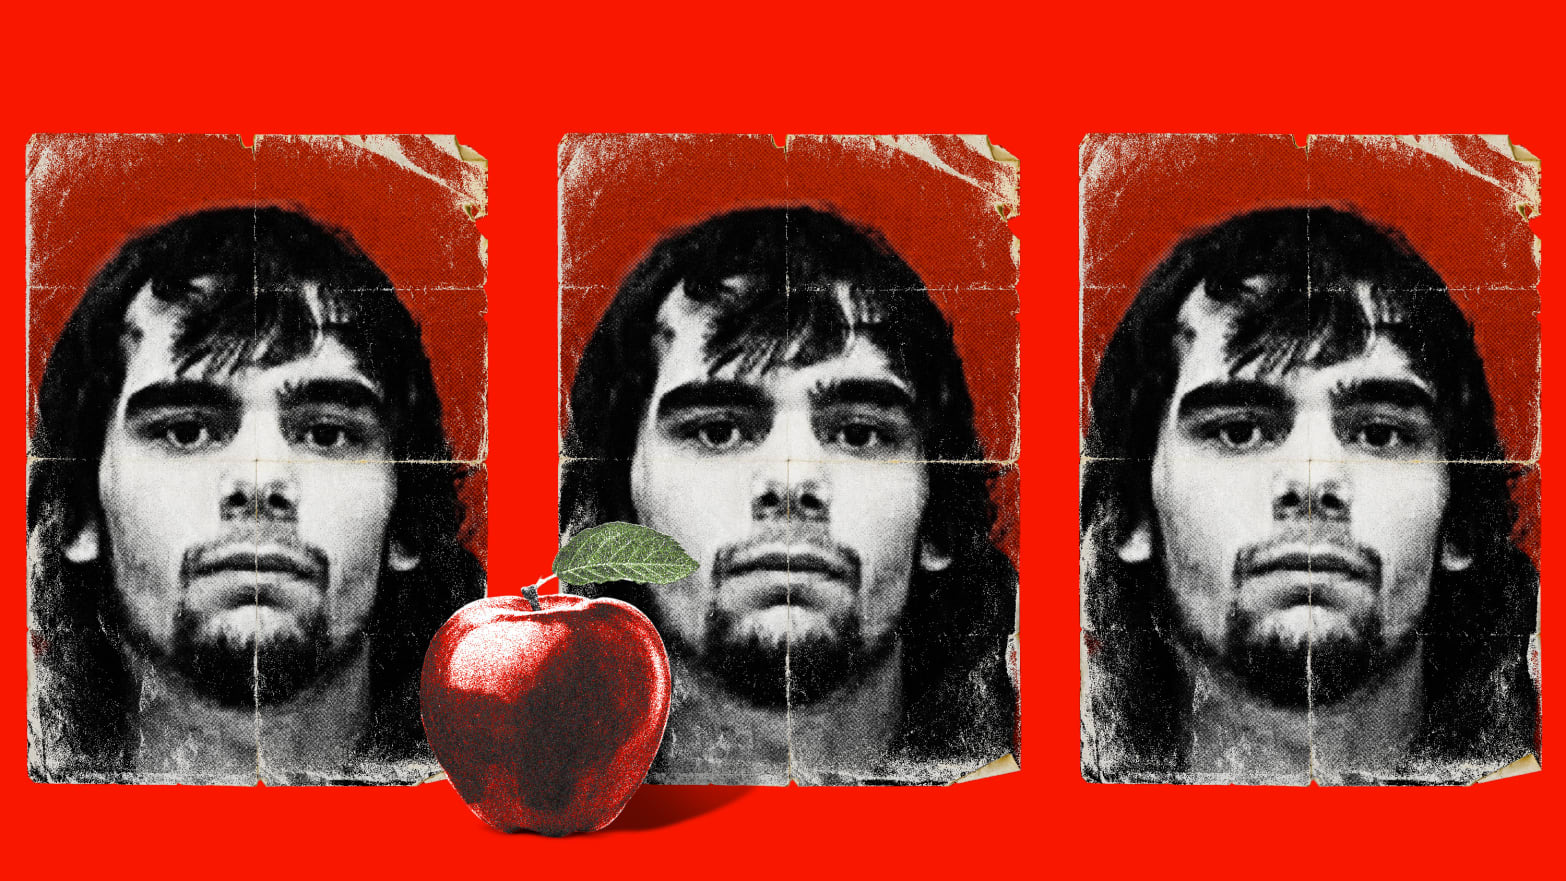 Photo Illustration of Gage Ashley and an apple